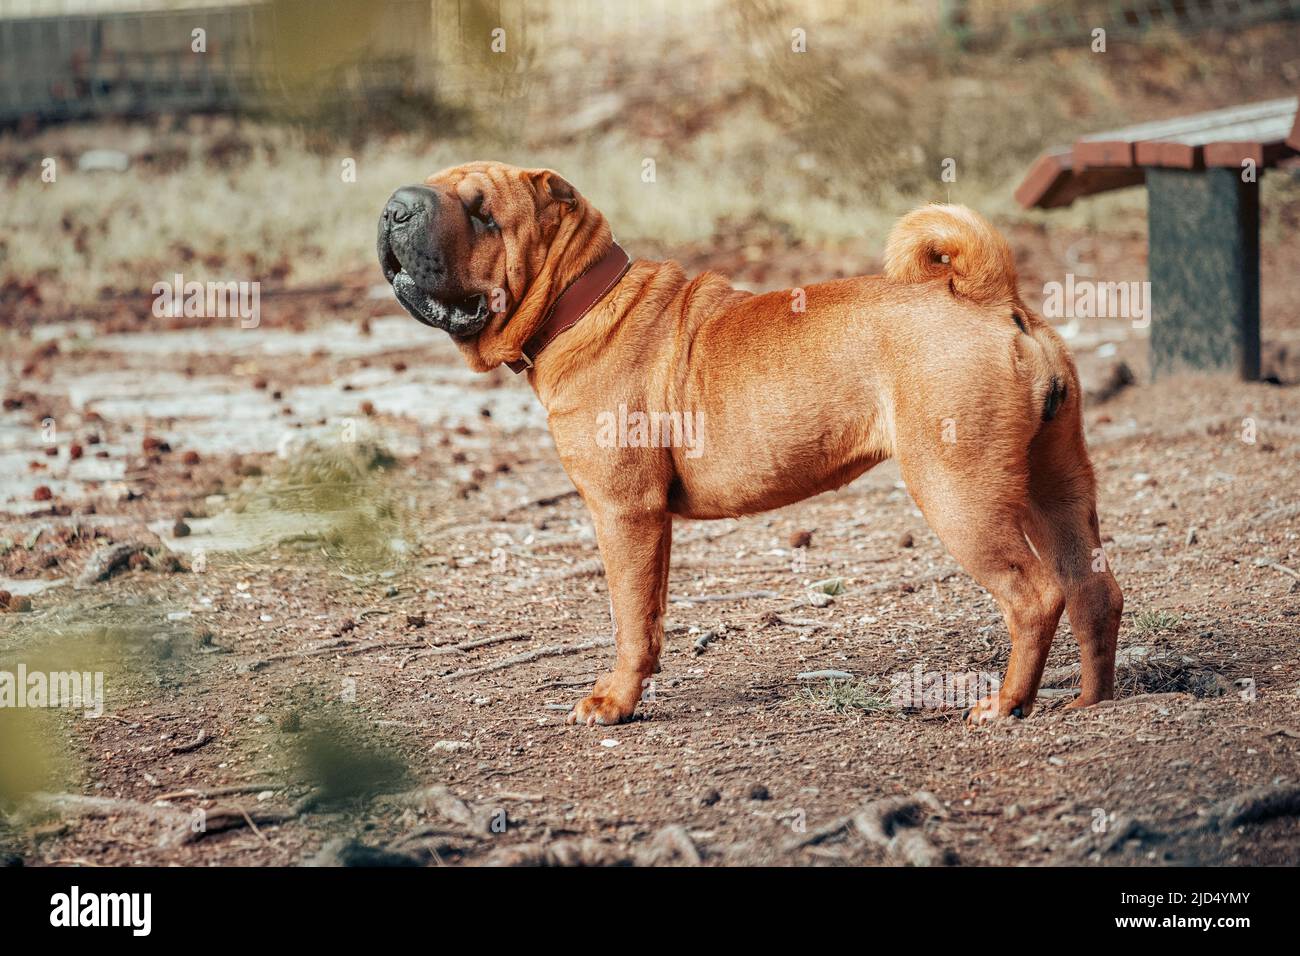 Shar Pei dog breed walking in park. Unusual and funny adorable pet from China. Adorable muzzle with numerous wrinkles and saliva secretions Stock Photo